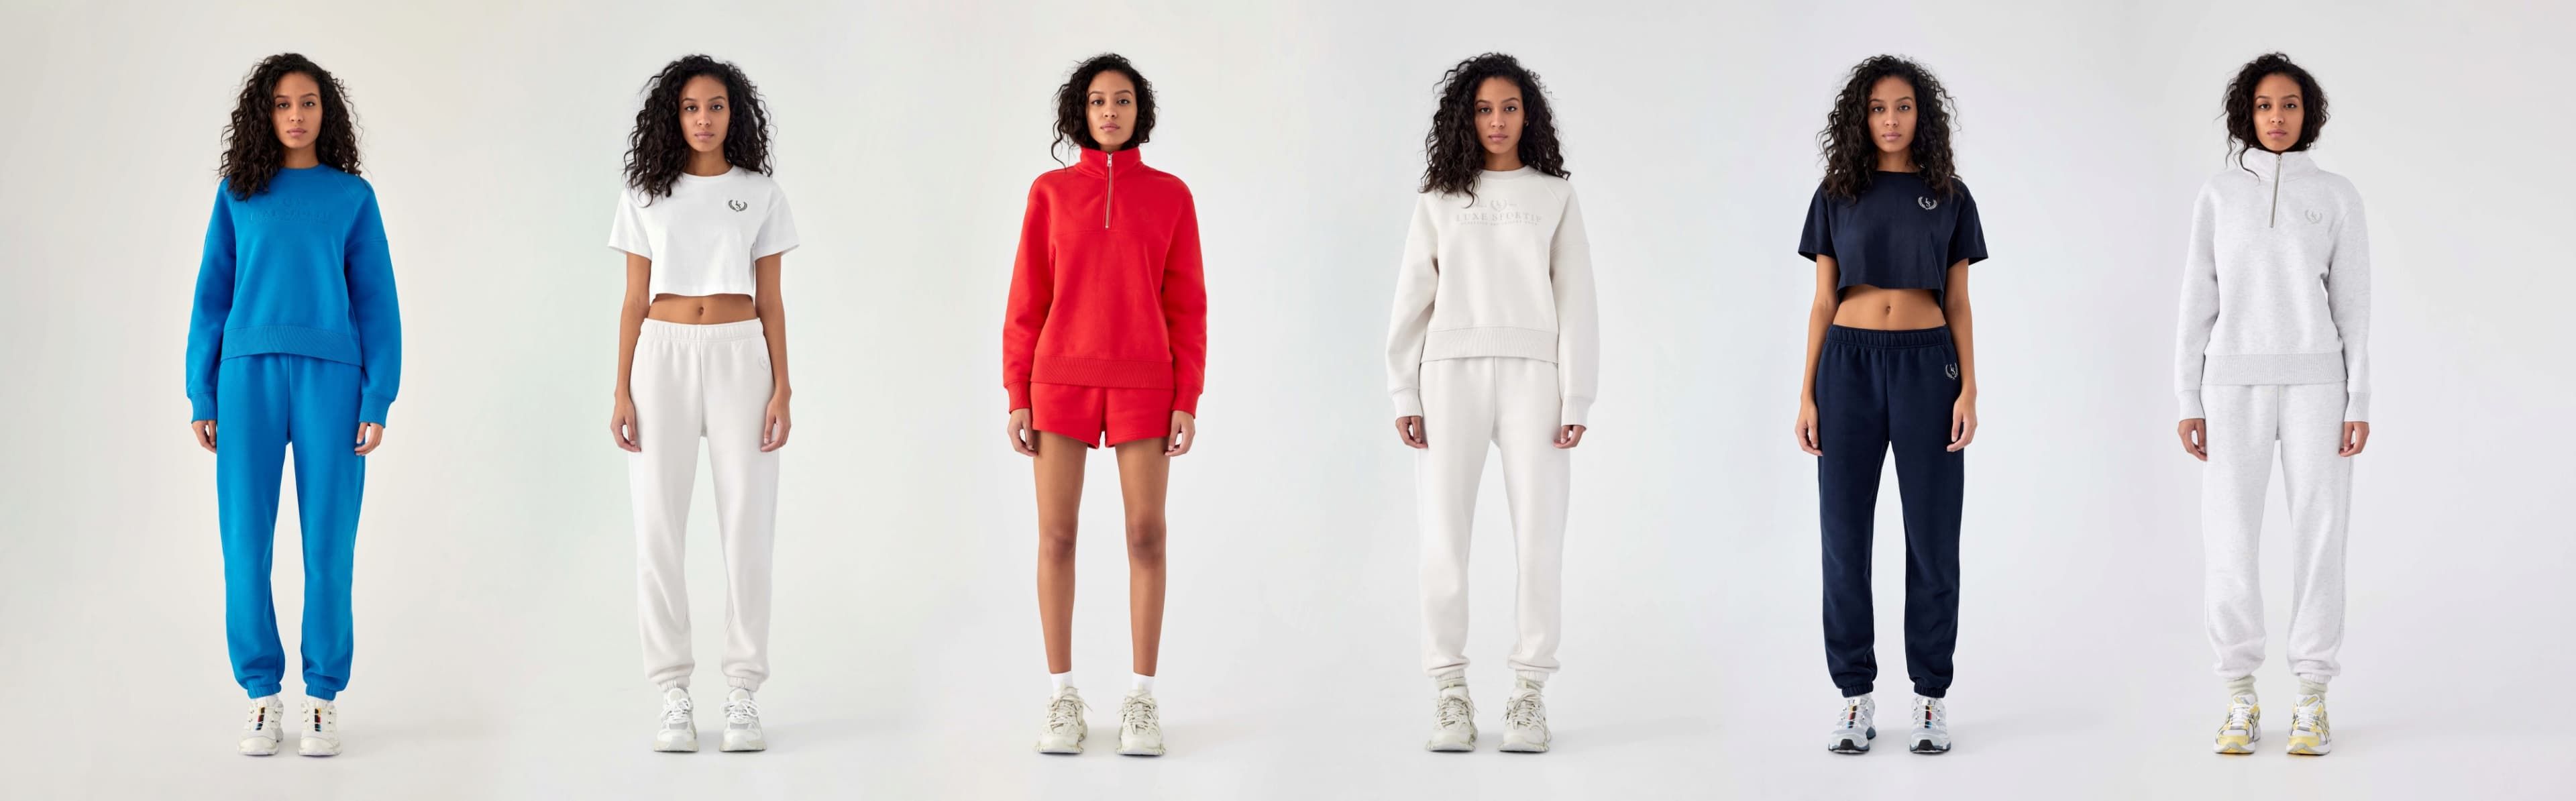 A model wears the blue crewneck and sweatpant set, the white crop t-shirt and white sweatpant, the red crewneck and short set, the white crewneck and sweatpant set, a black crop t-shirt and black sweatpant, and a white zip-up hoodie and sweatpant set.